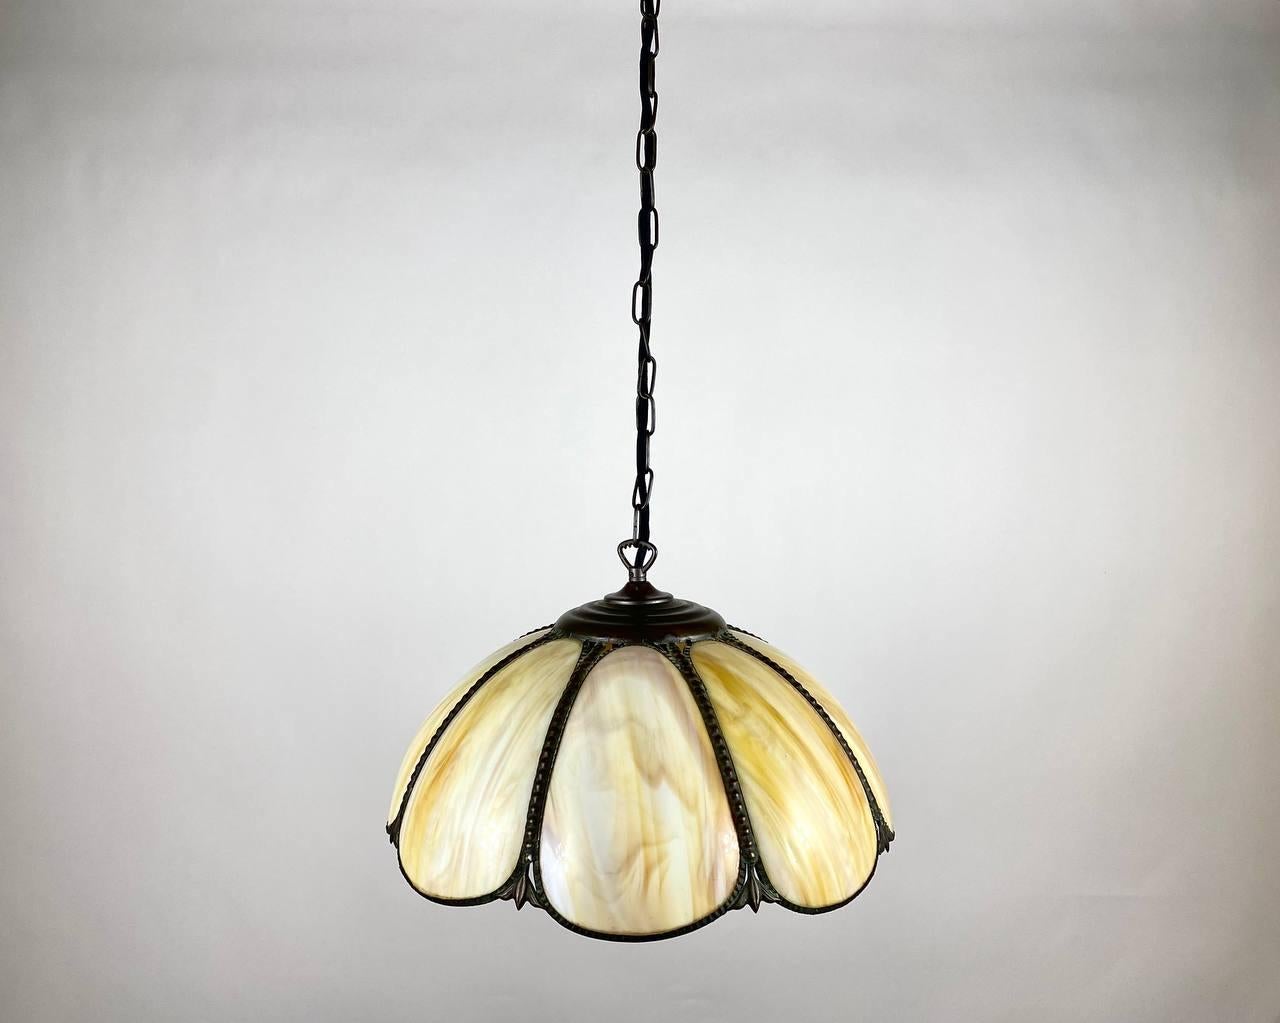 Hand-Crafted Vintage Tiffany Style Pendant Light, Italy, 1980s.